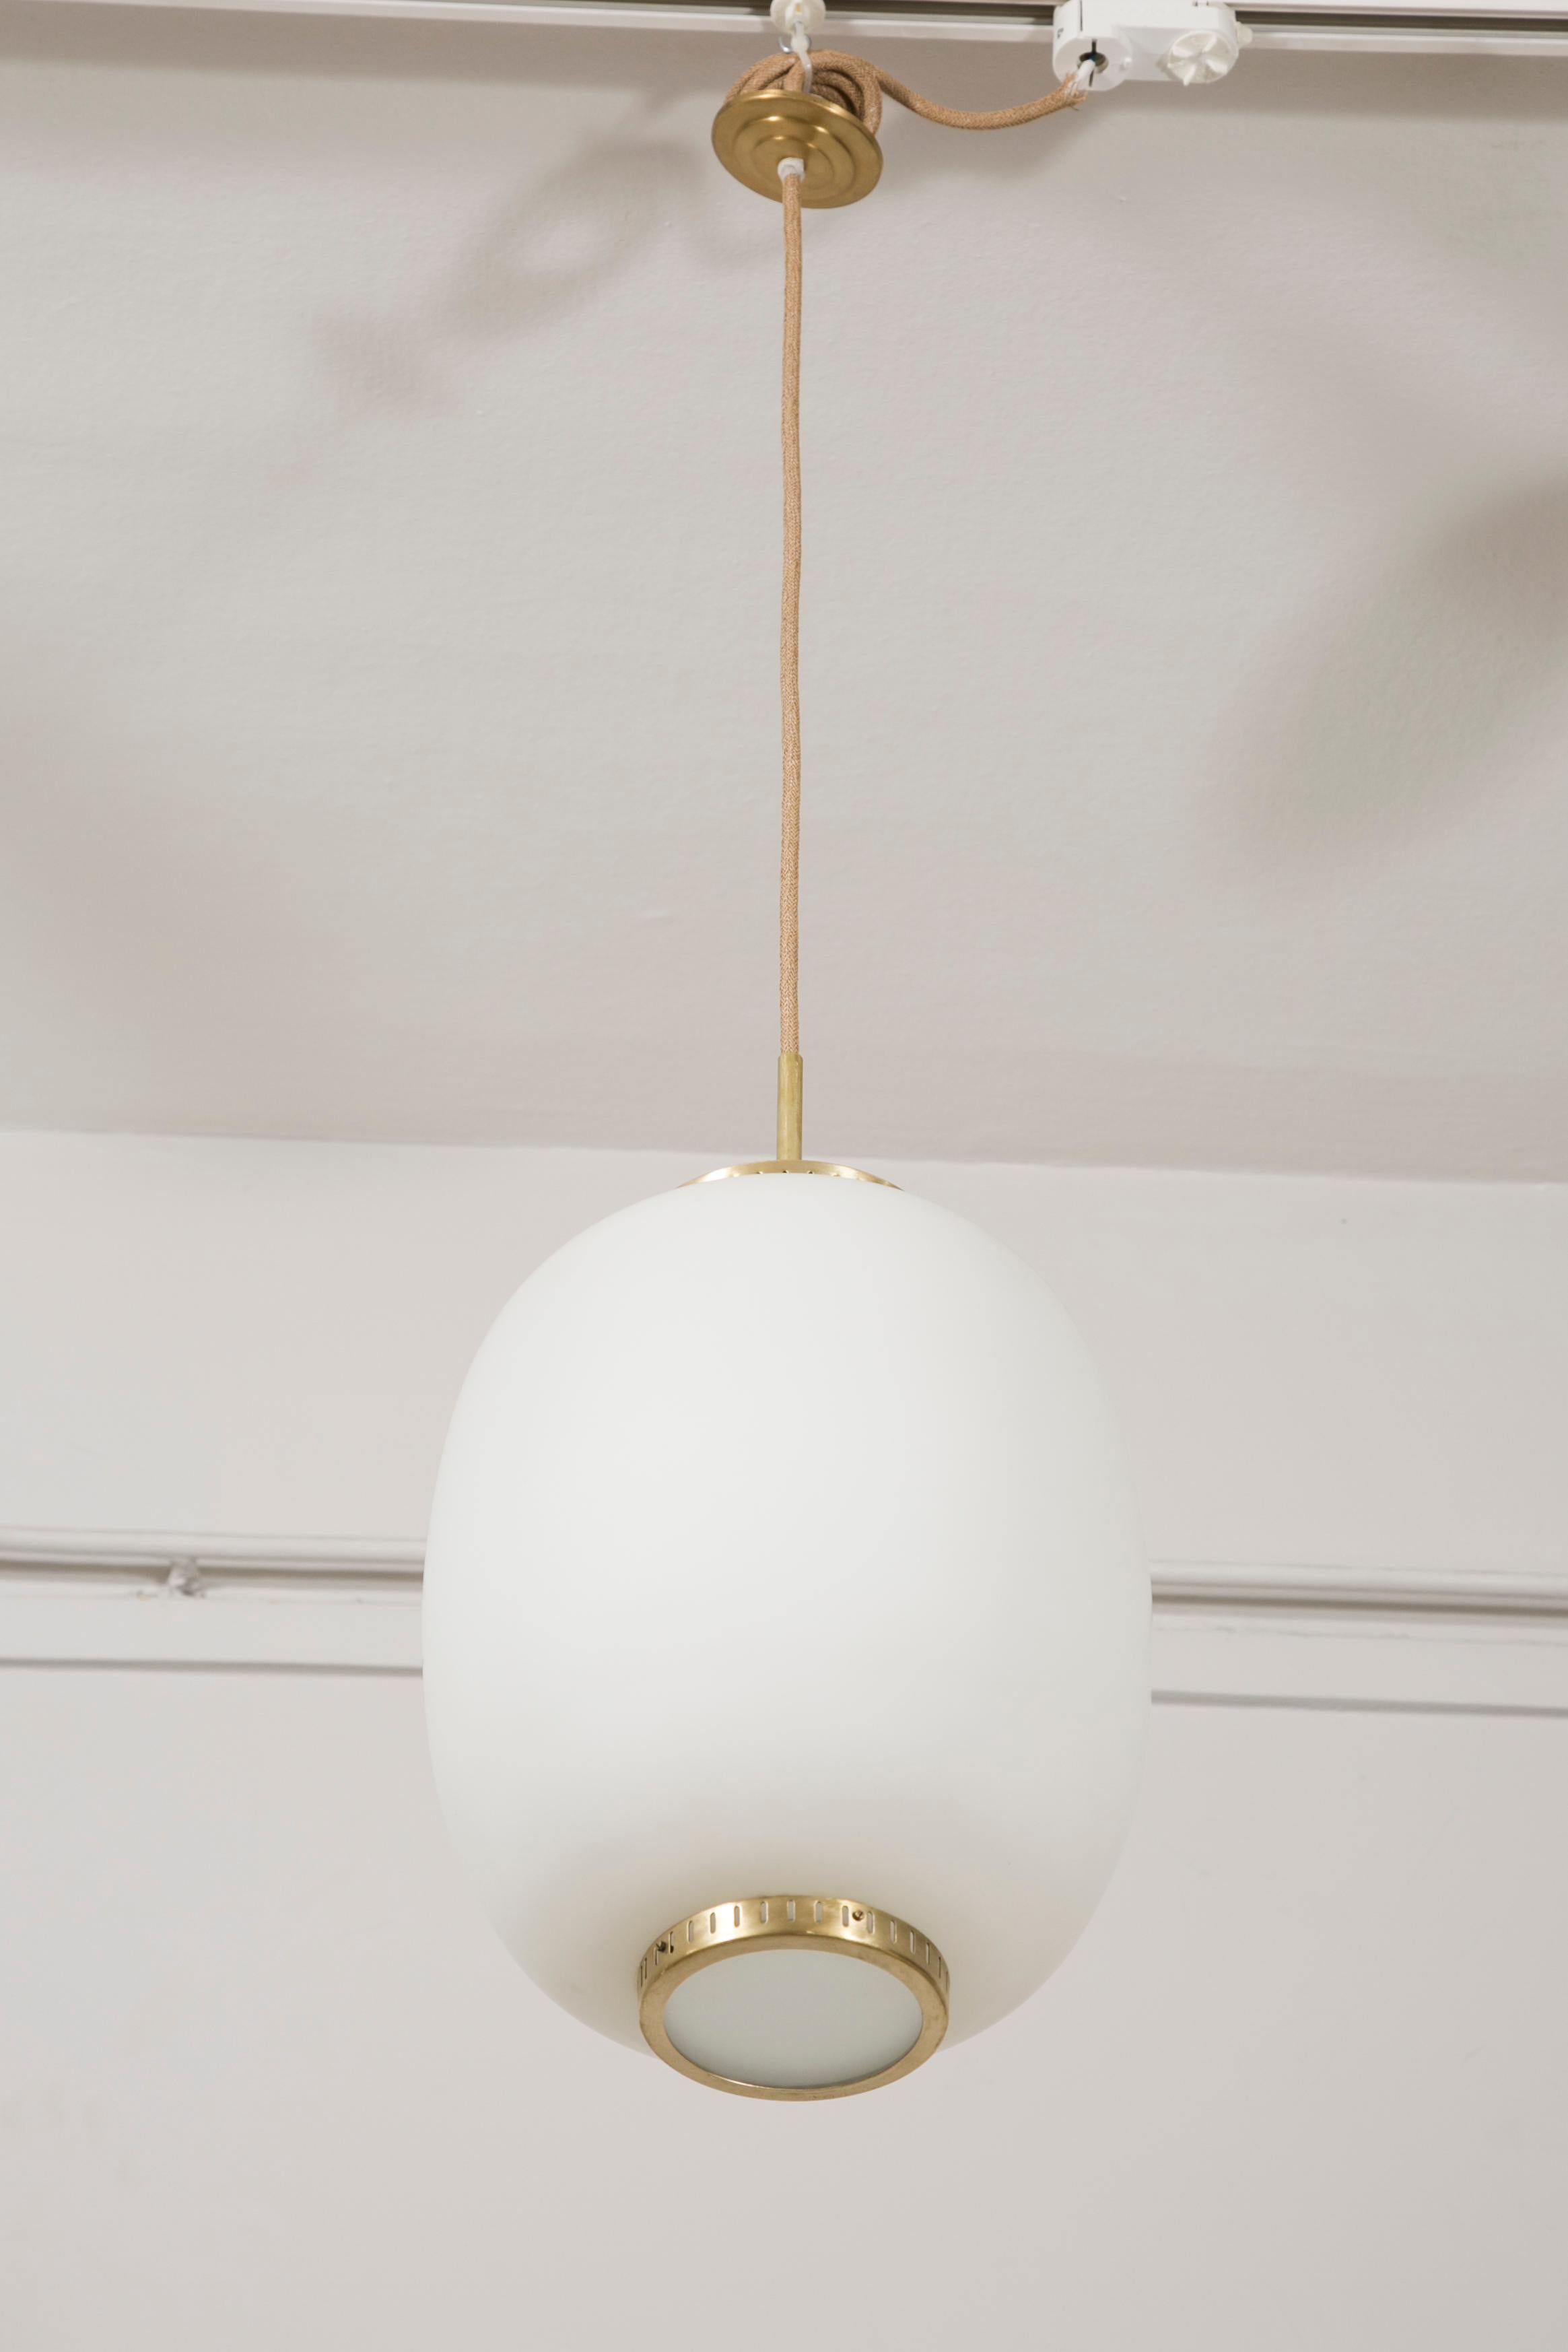 Mid-20th Century Collection of 10 Opaline Glass and Brass Ceiling Fixtures, Bent Karlby for Lyfa